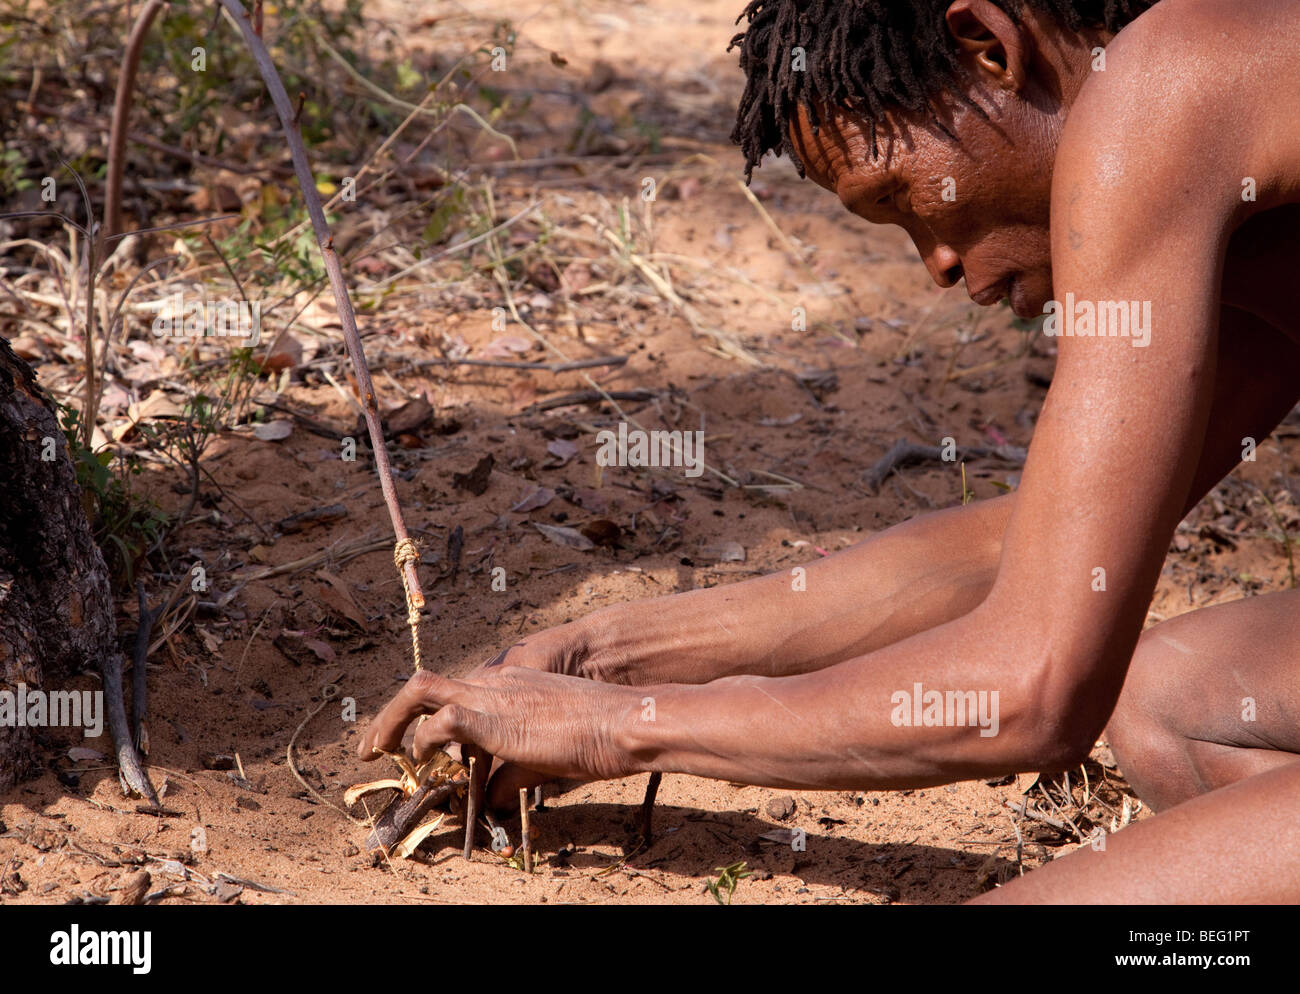 San Village. Setting a sprung lasso trap to catch 'lunch'. Stock Photo